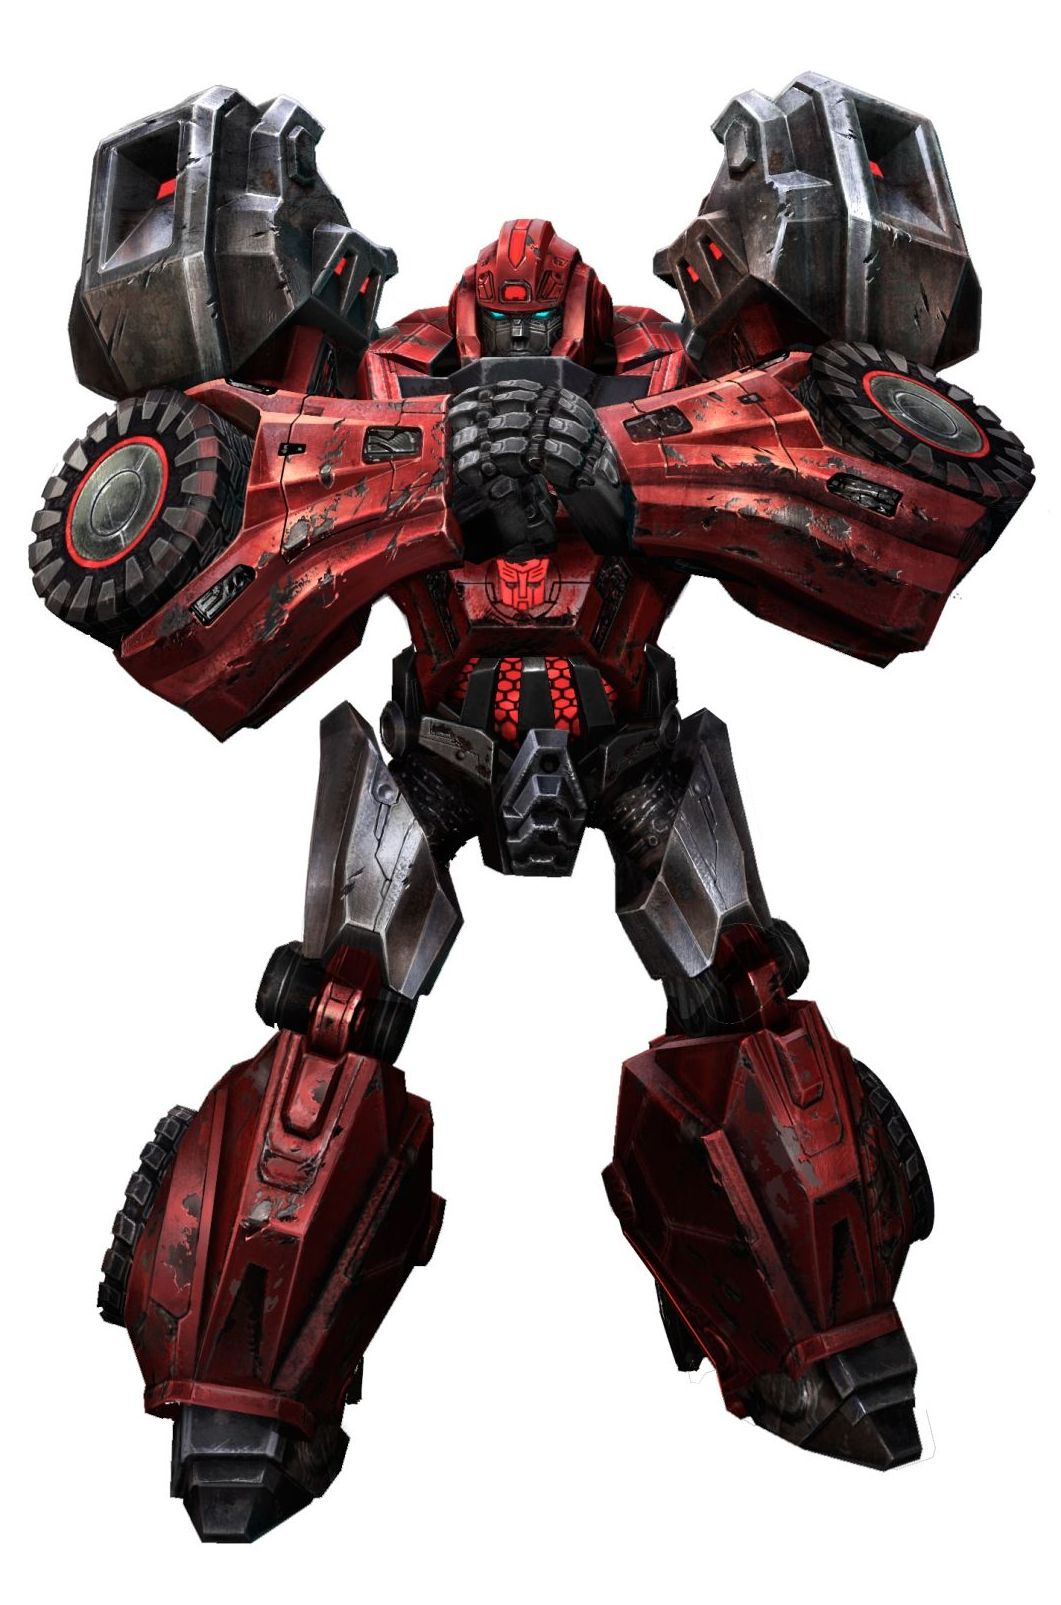 Buy TRANSFORMERS: Fall of Cybertron